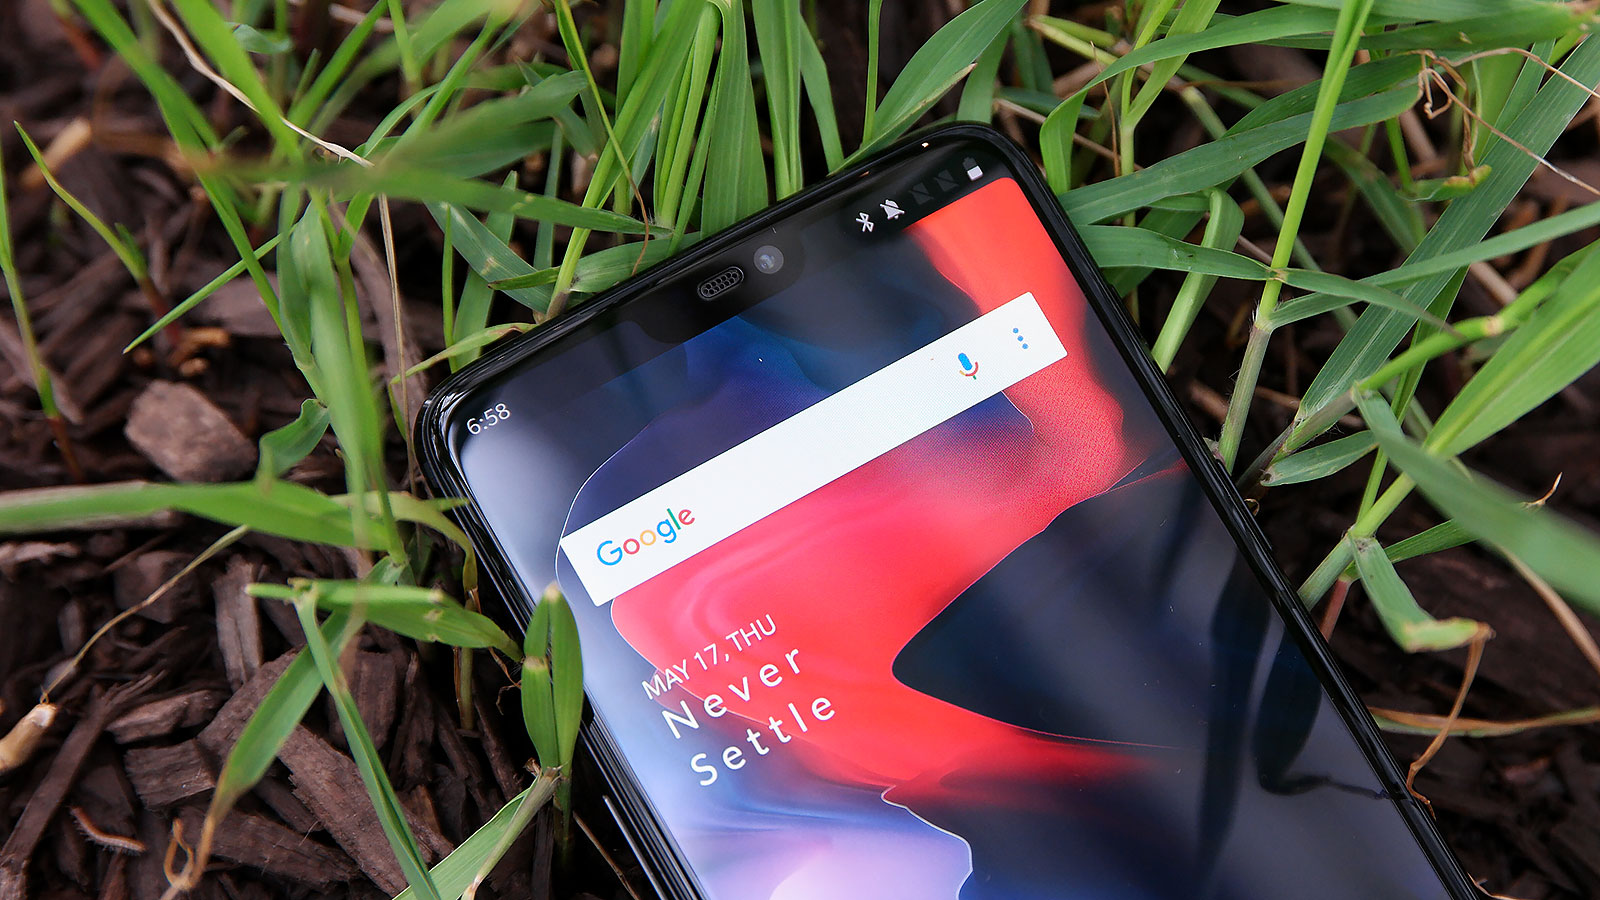 OnePlus 6 Review: The Best Android Phone That Won’t Destroy Your Finances